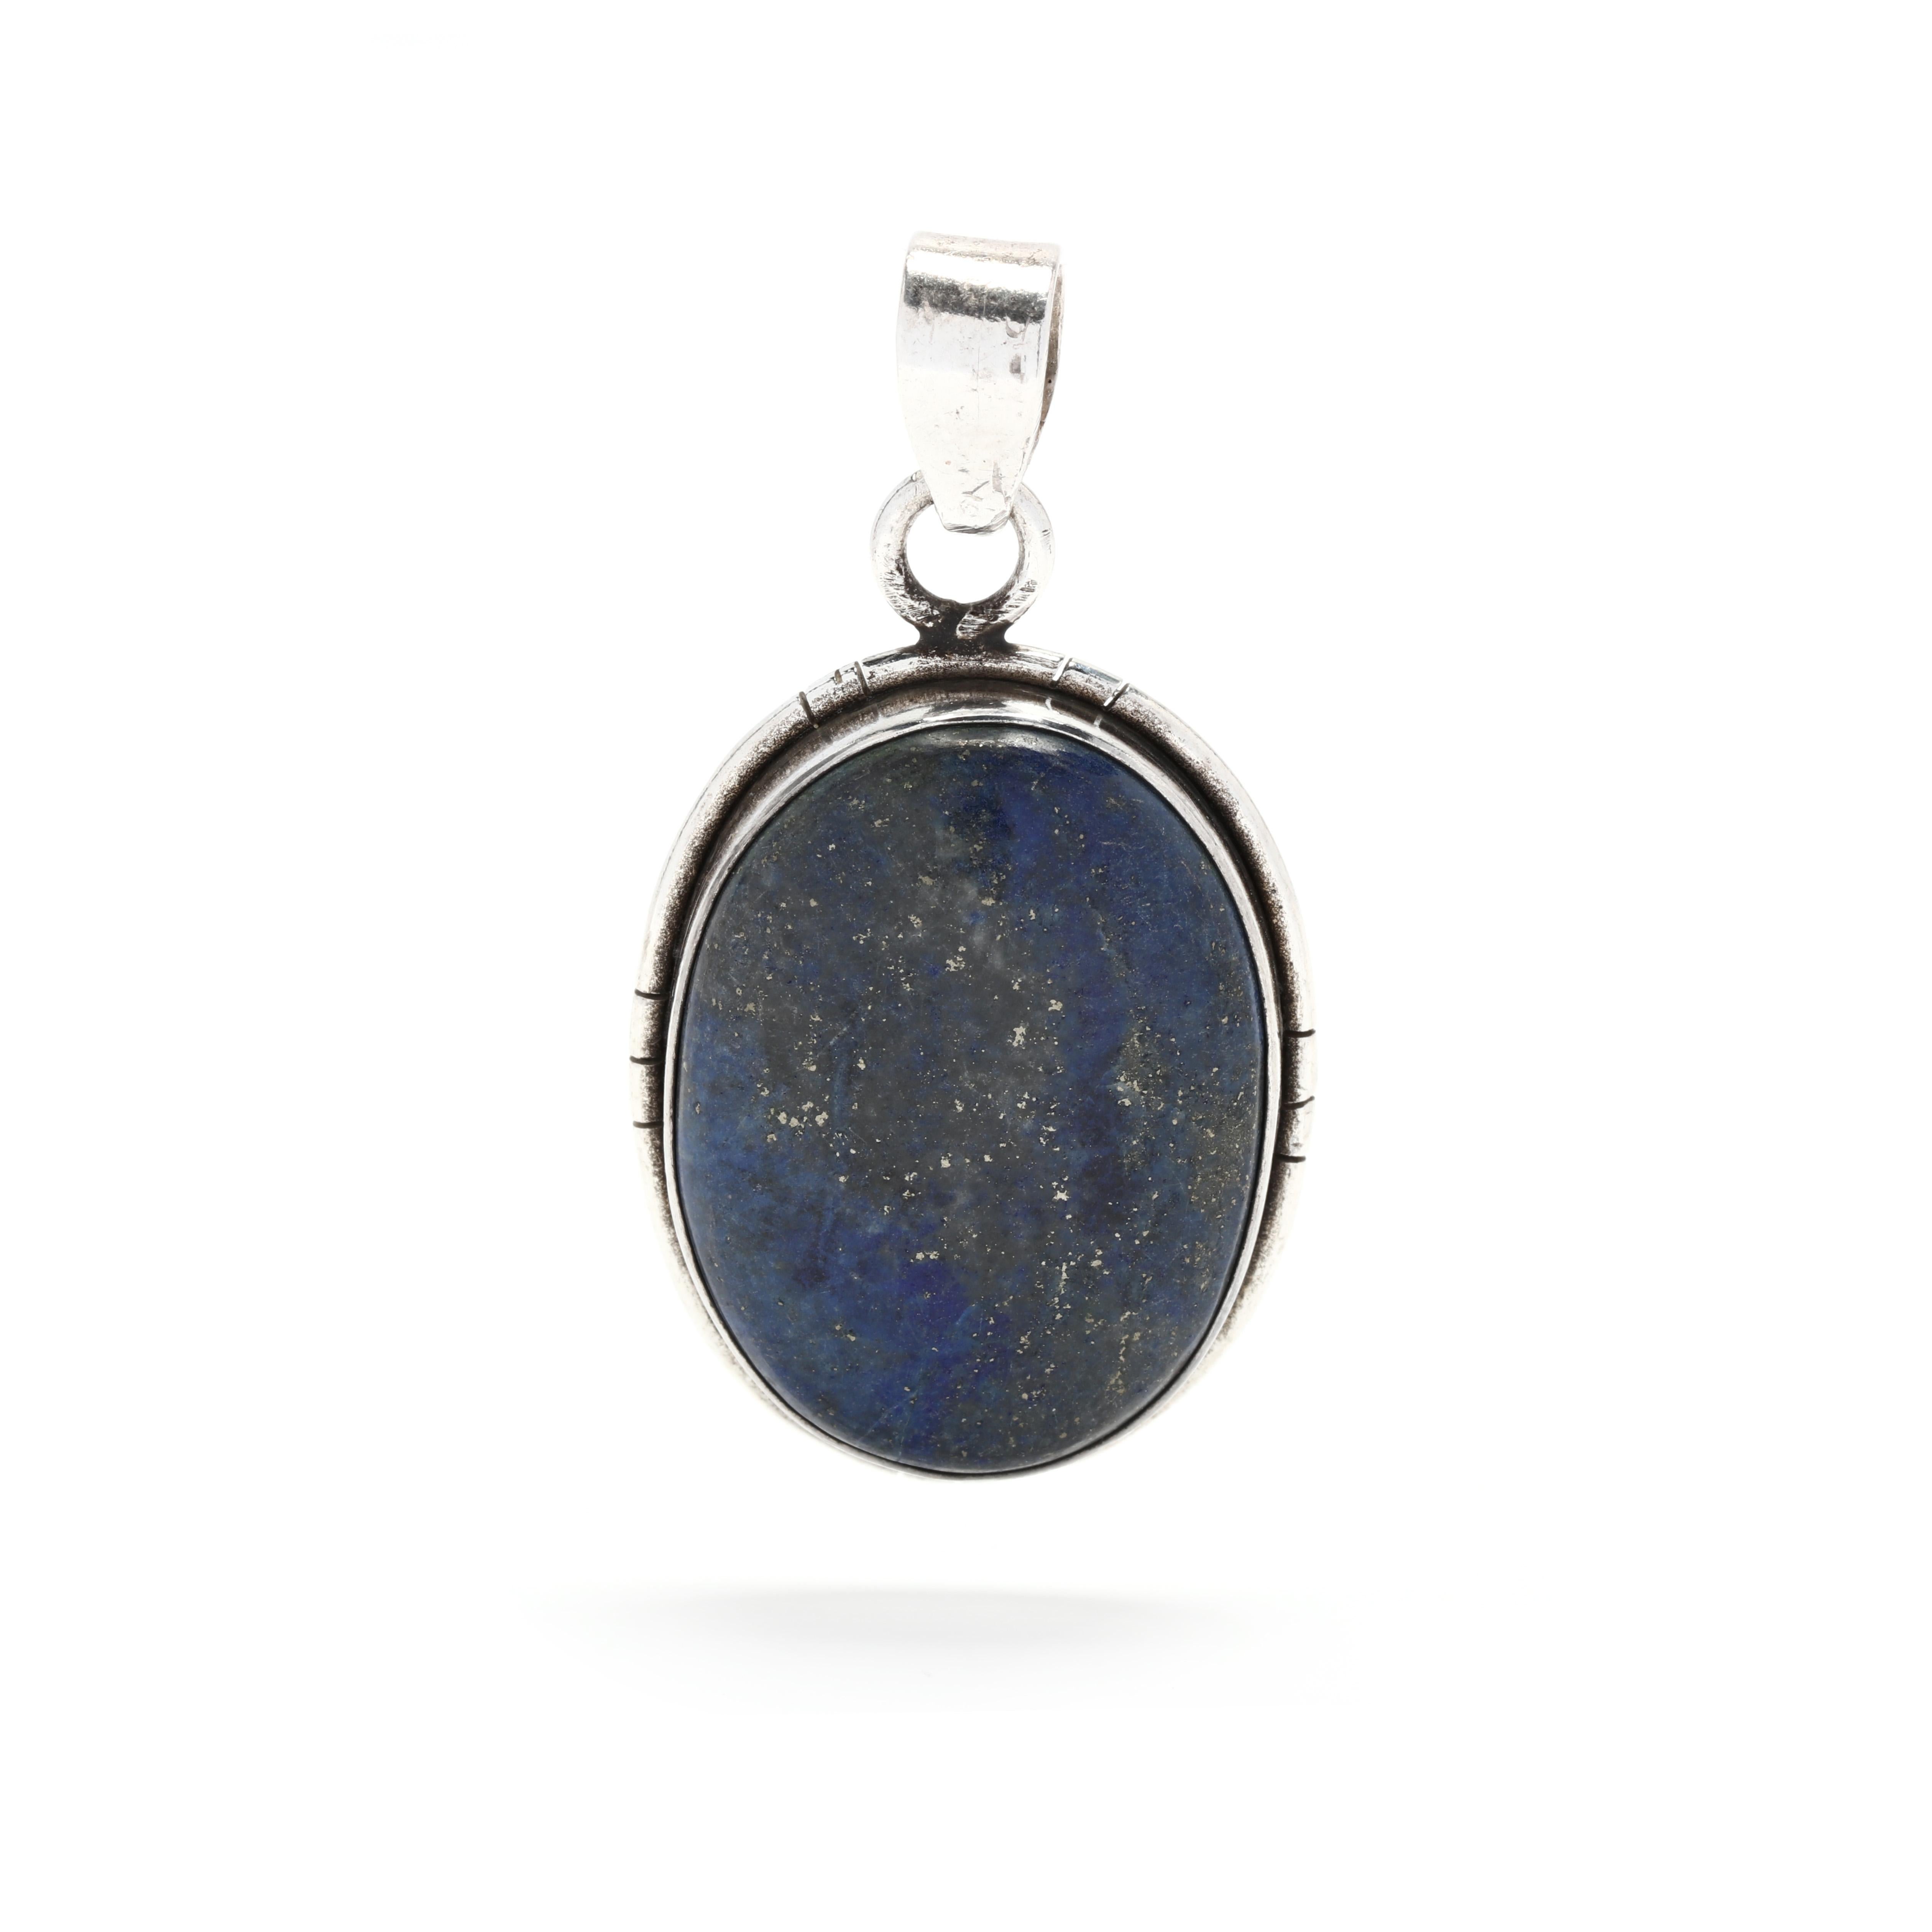 This beautiful lapis lazuli cabochon pendant is made of sterling silver and set with a stunning blue stone. The pendant features a unique cabochon cut to reveal the mesmerizing deep blue color of the lapis lazuli. The stone is encased in an elegant